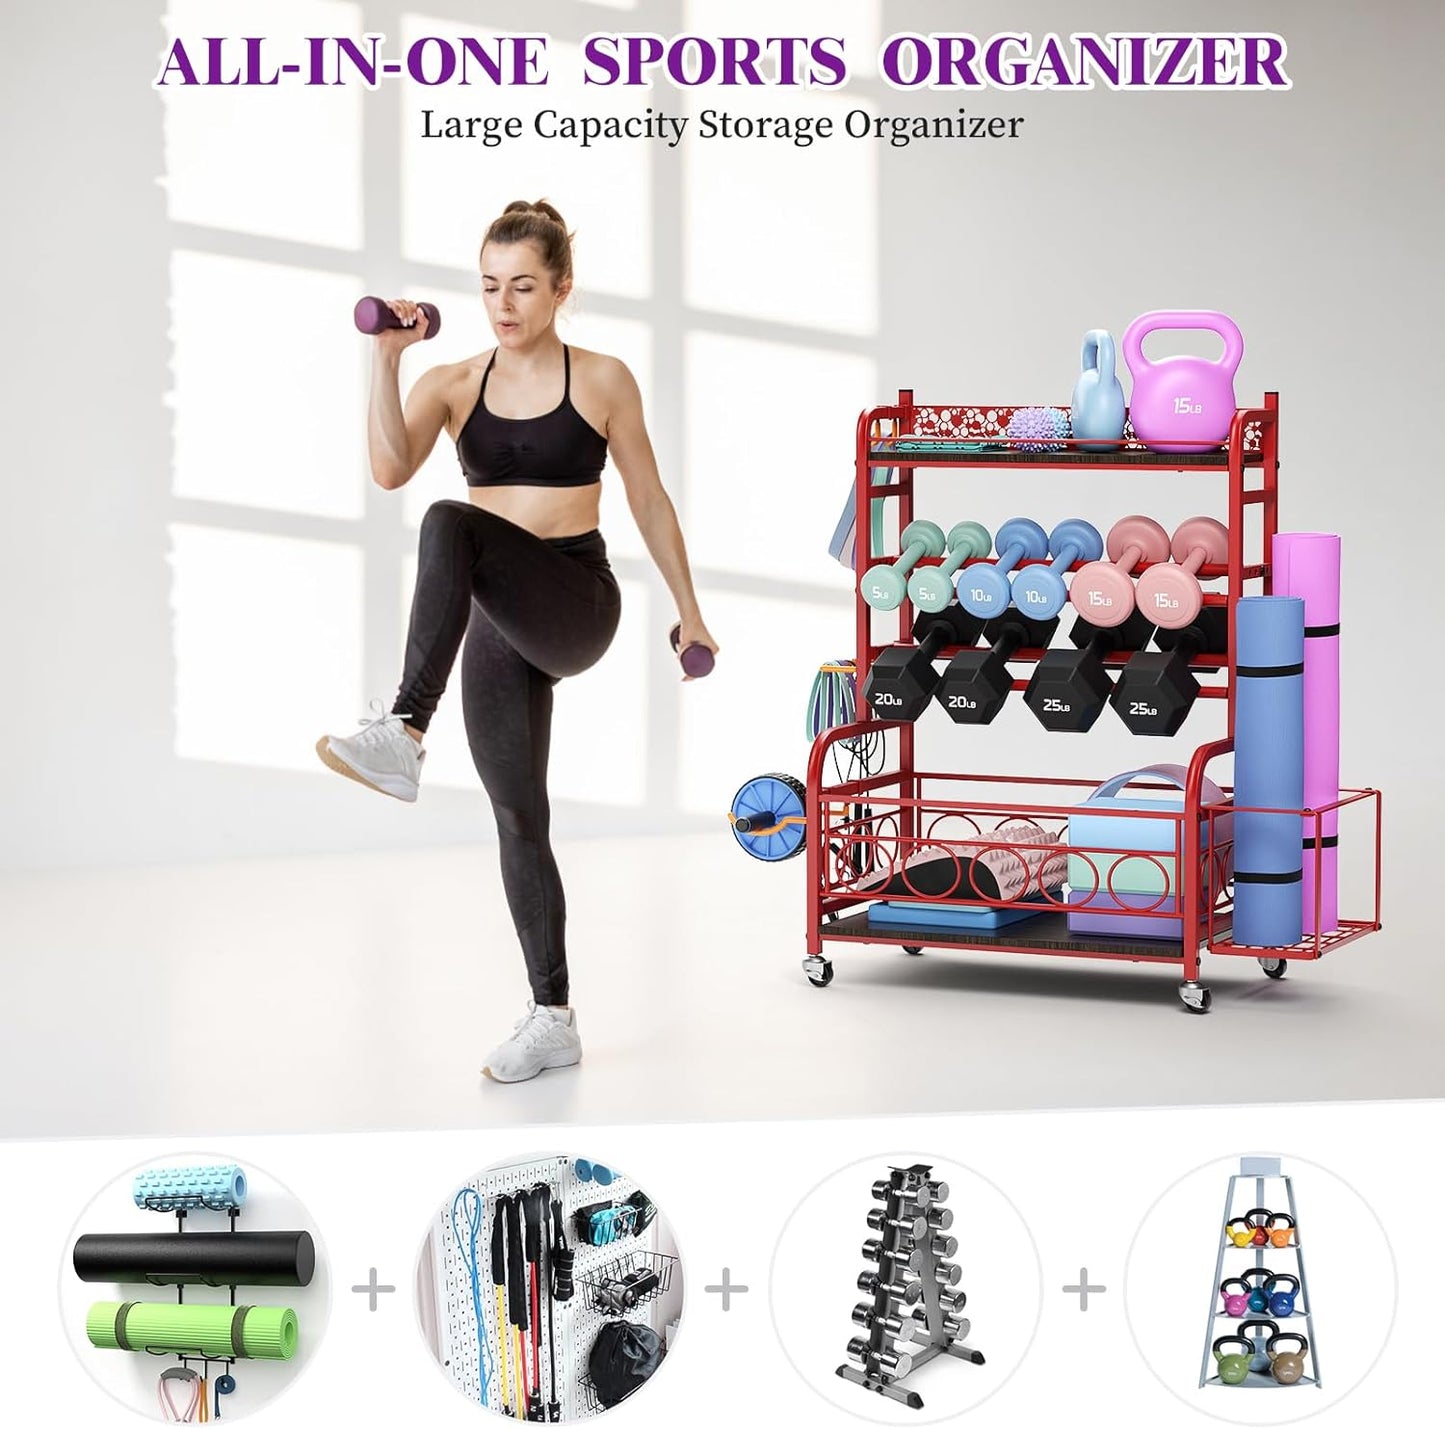 Weight Rack for Dumbbells, Dumbbell Rack Weight Stand,  Home Gym Storage Rack for Yoga Mat Kettlebells and Strength Training Equipment, Weight Storage Holder Rack for Dumbbells with Wheels